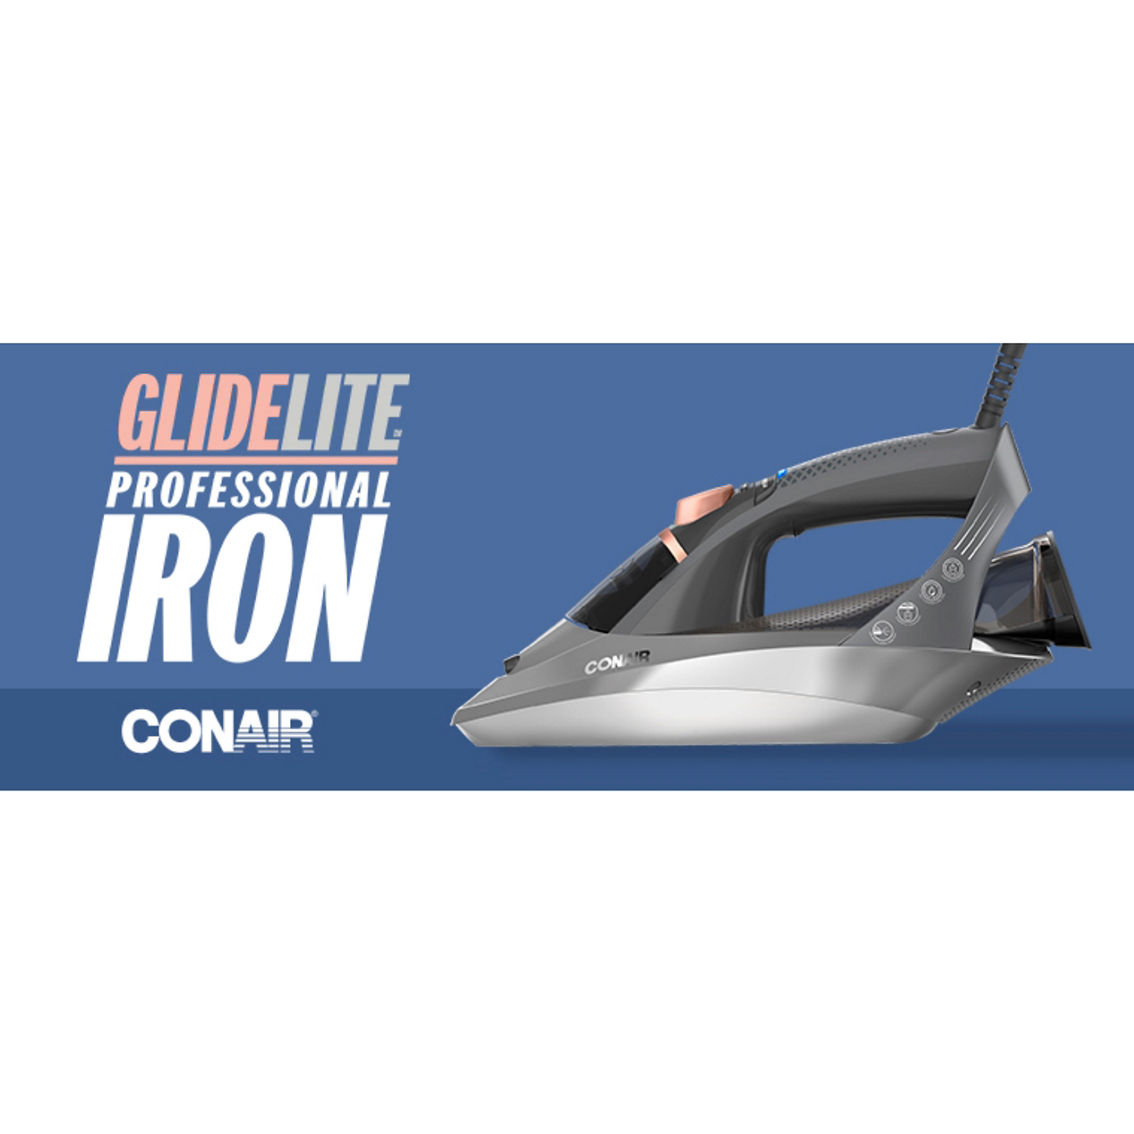 Conair Wave Breaker Frabic Steam Iron - Image 3 of 3